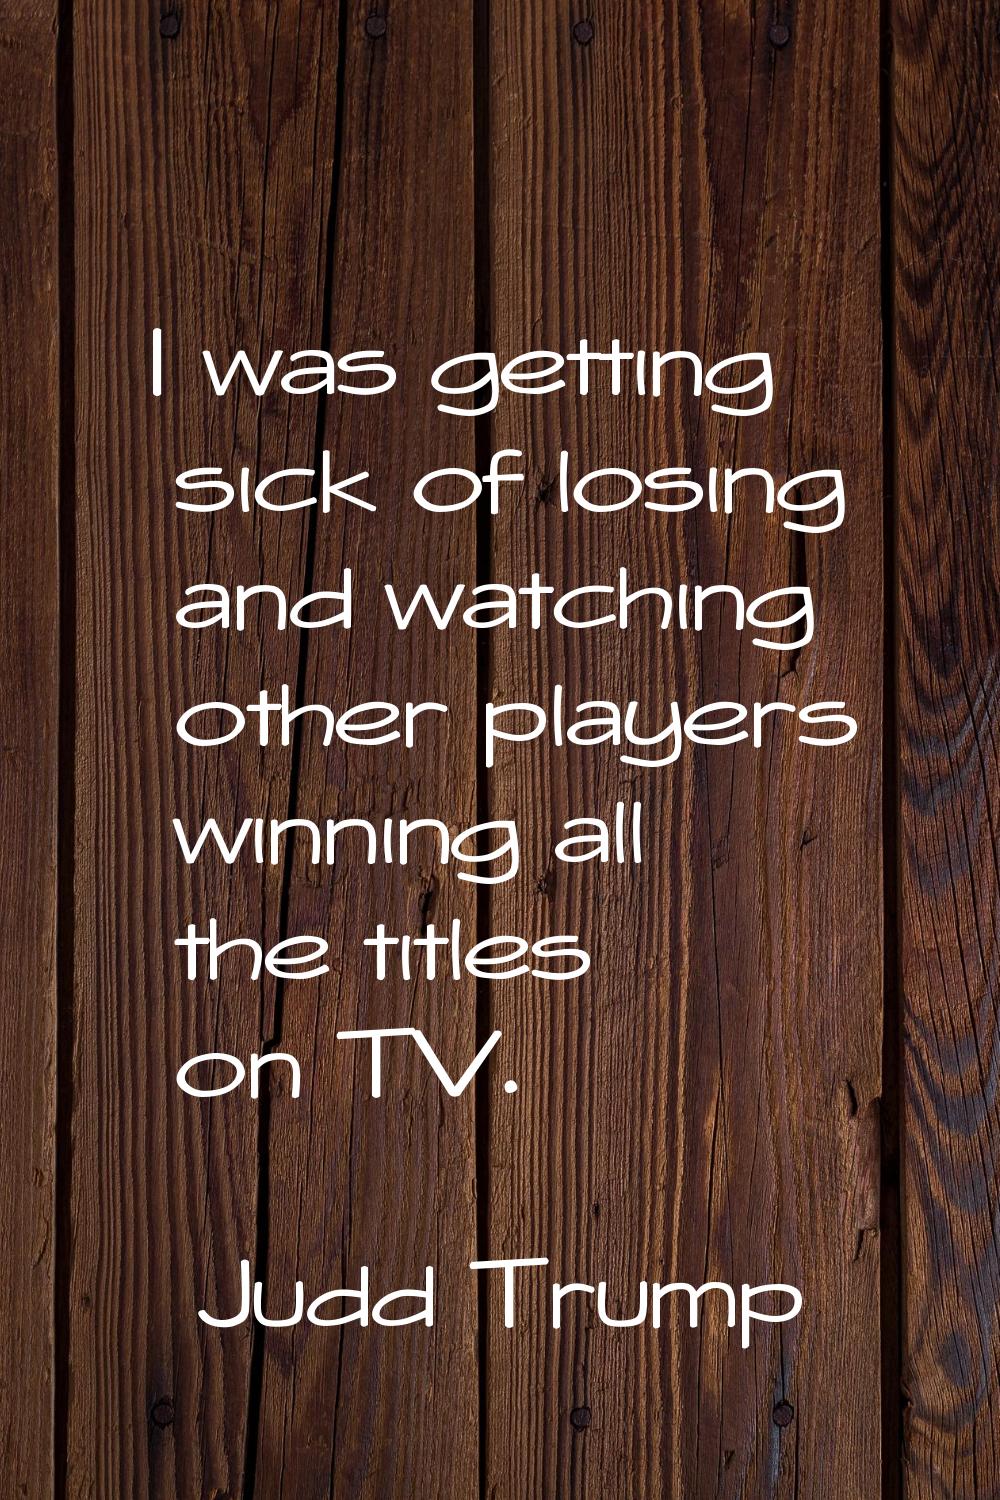 I was getting sick of losing and watching other players winning all the titles on TV.